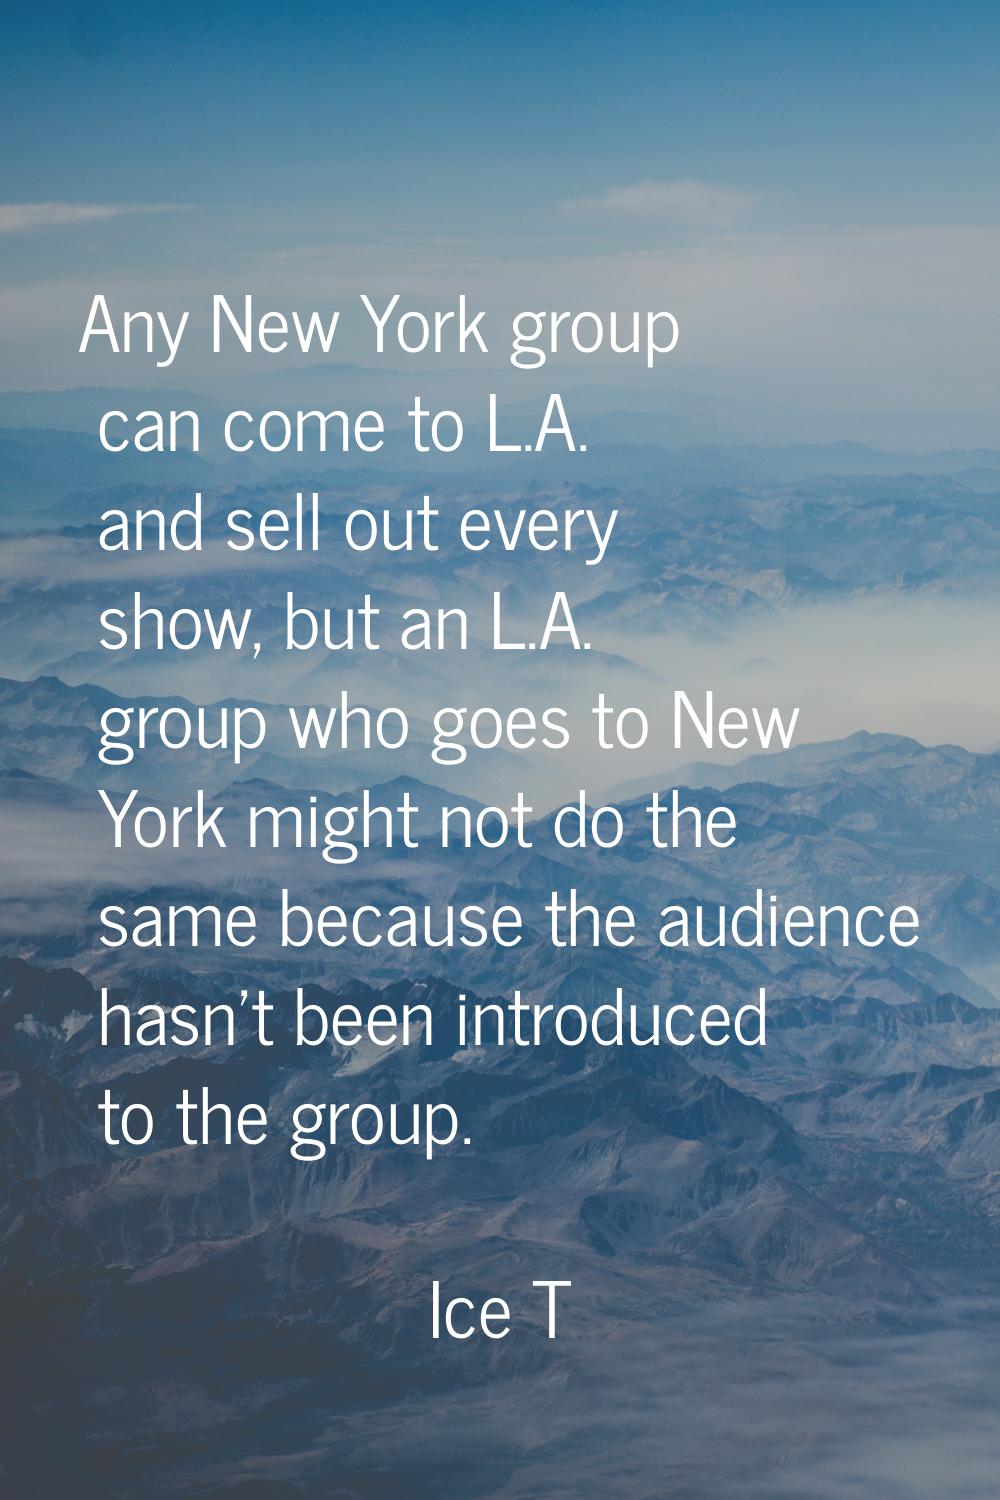 Any New York group can come to L.A. and sell out every show, but an L.A. group who goes to New York